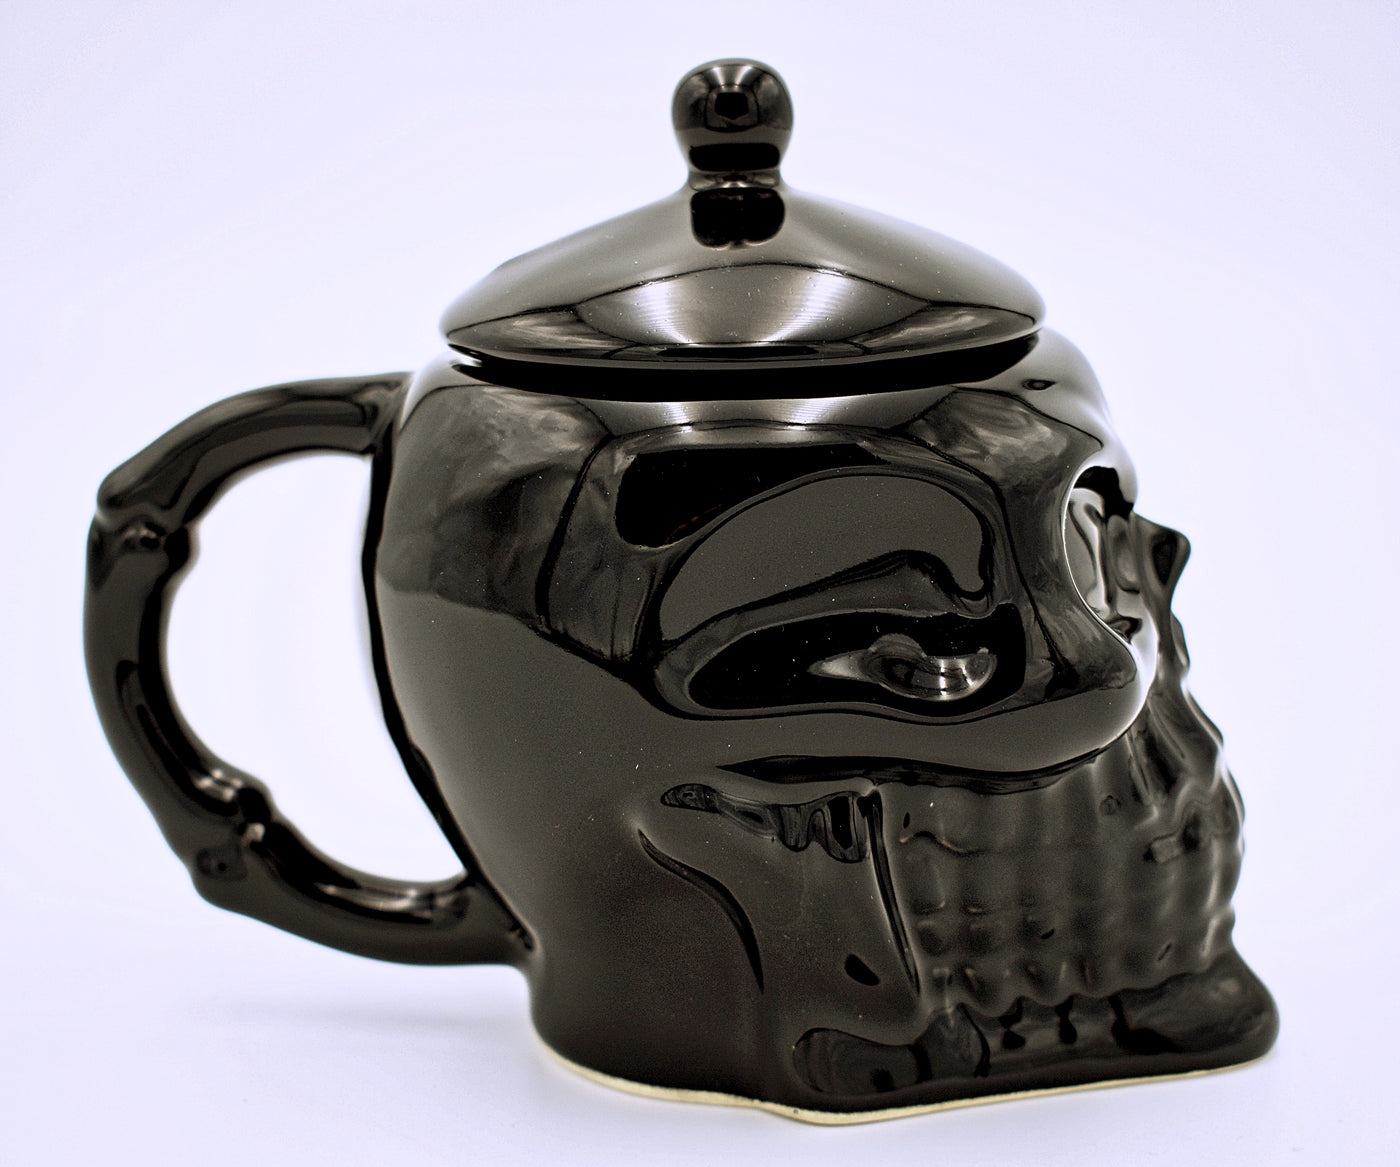 Porcelain Skull Sugar Bowl with Lid - The Cranio Collections